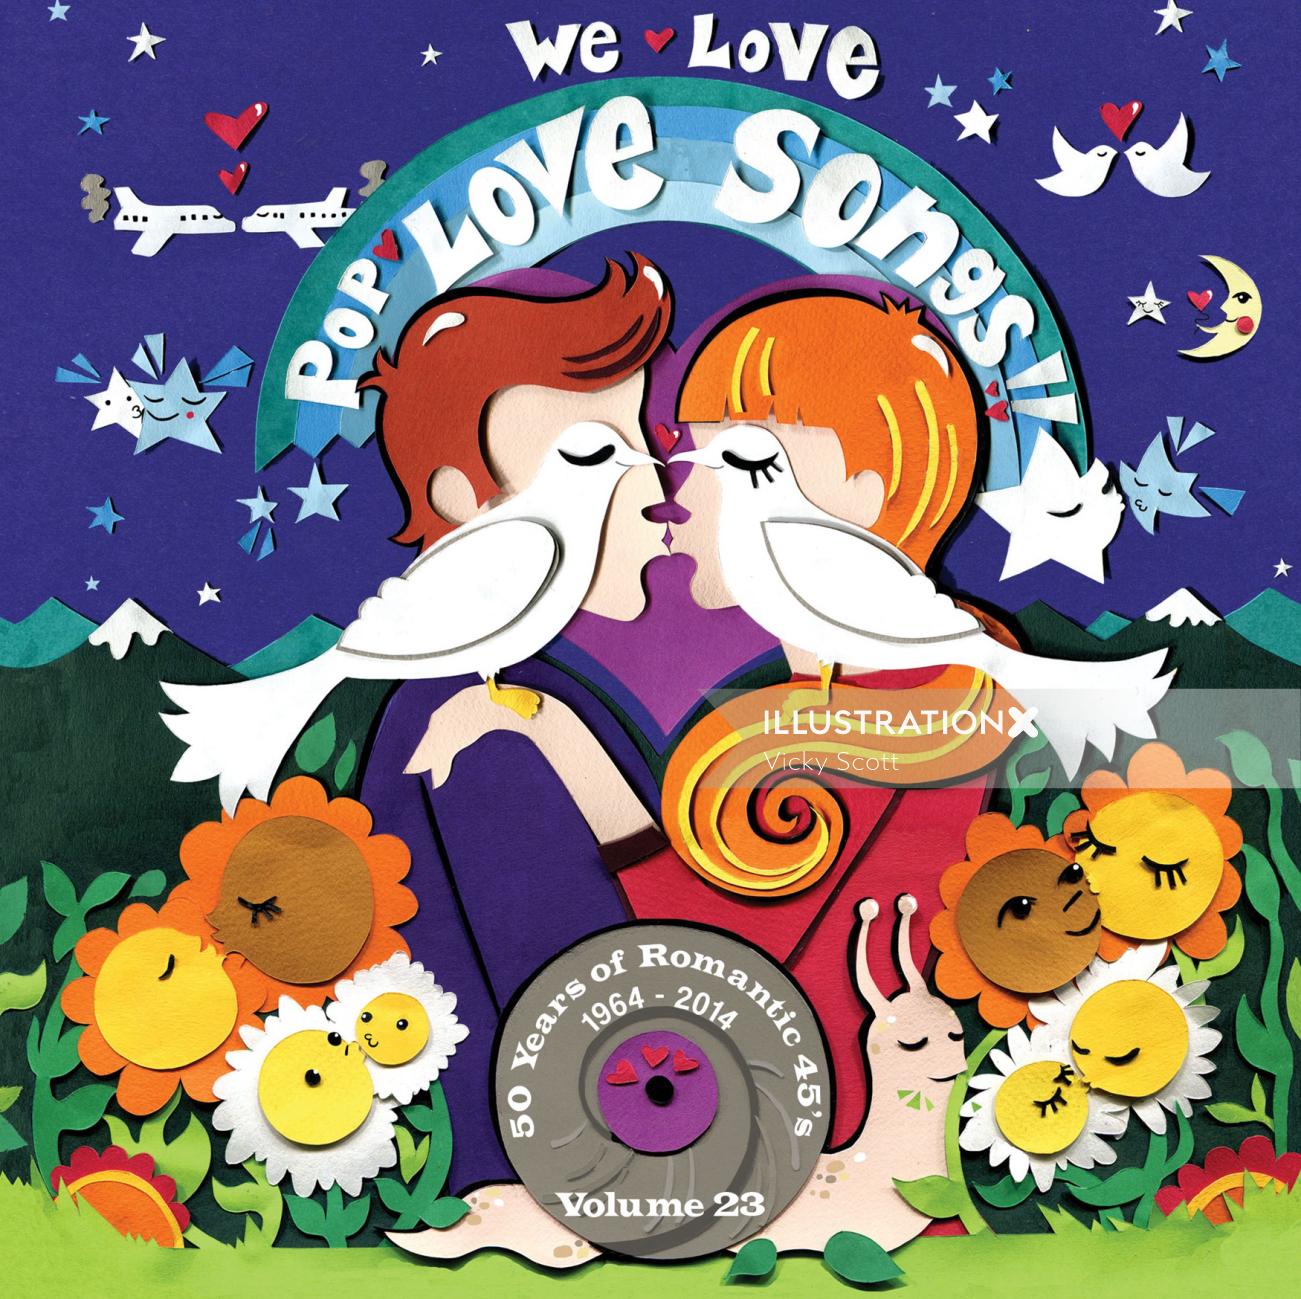 flowers, hand drawn type, couple, love, snail, pop, music, cd cover